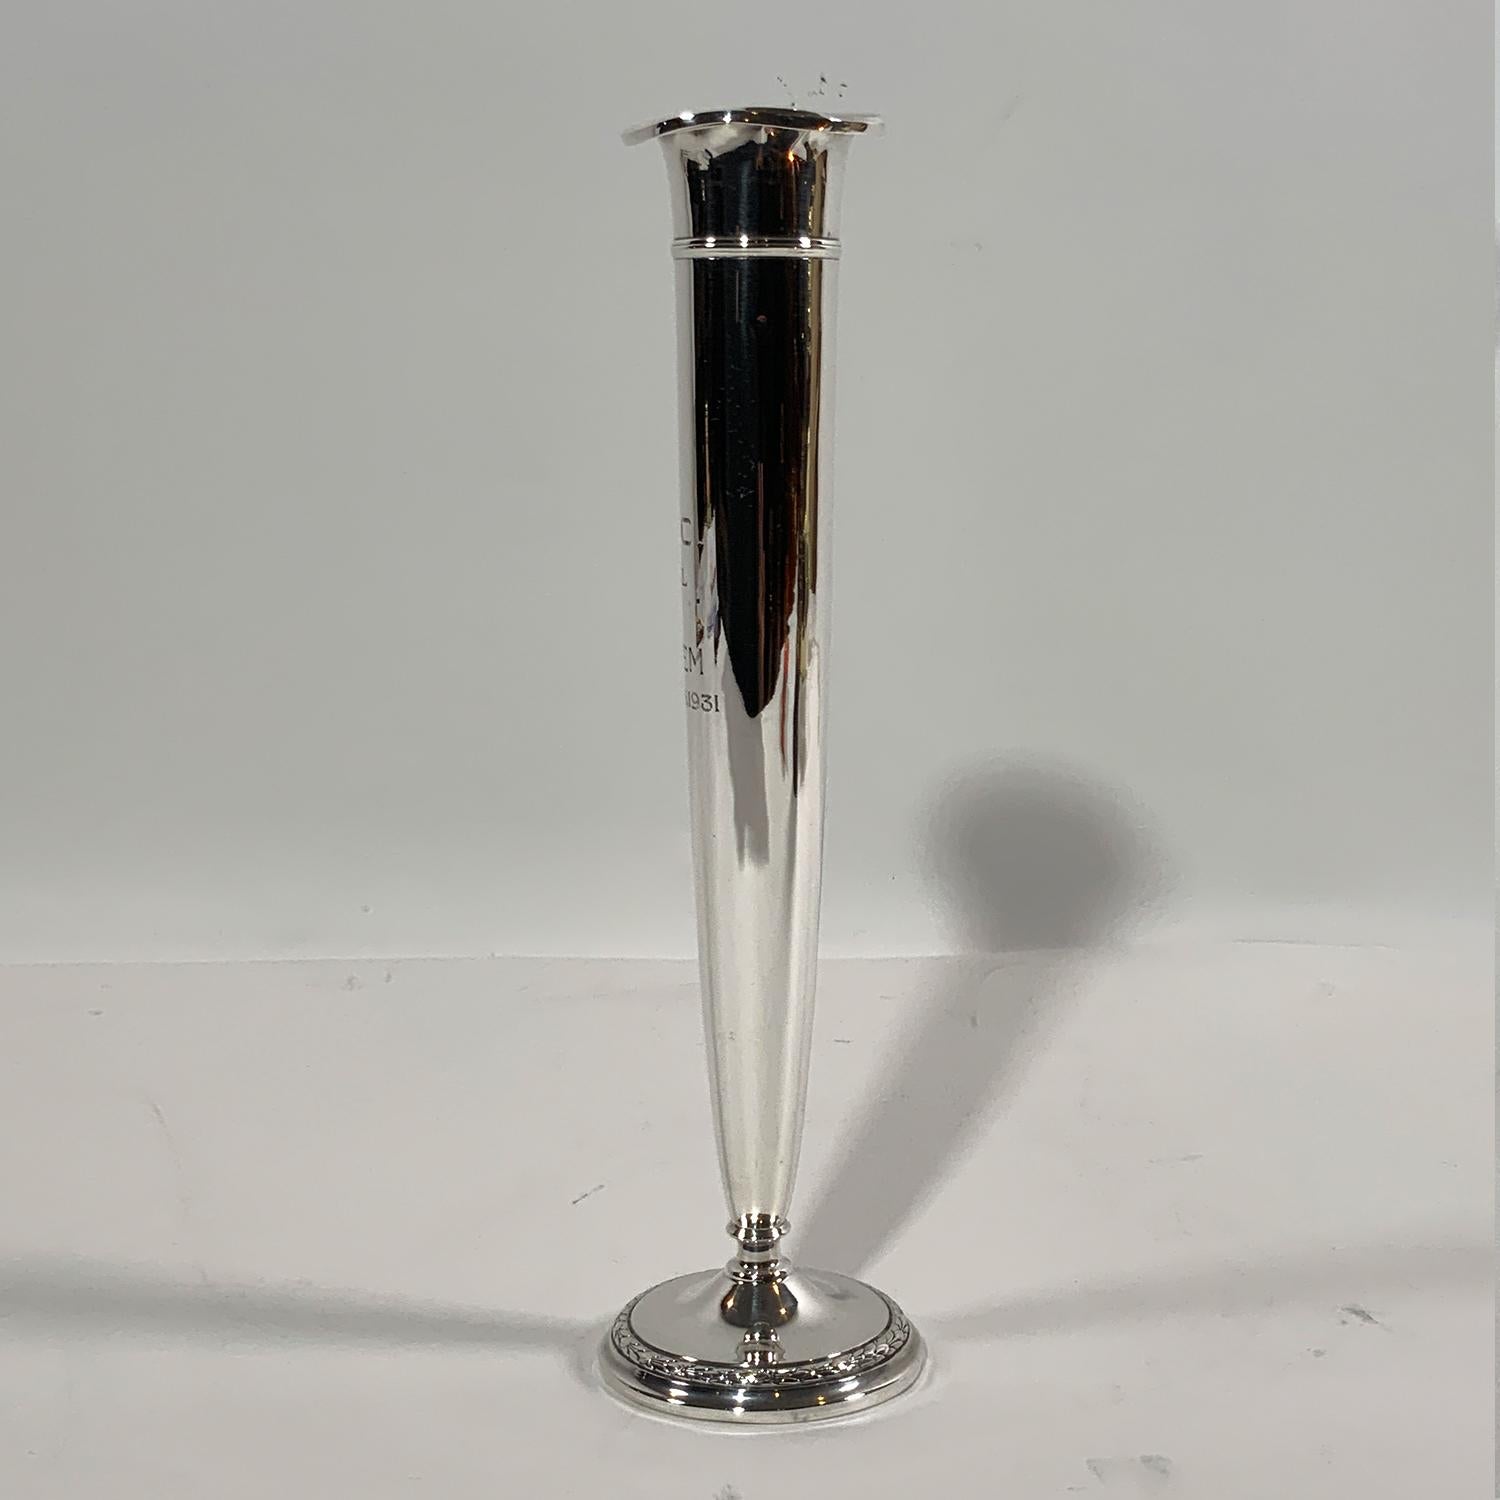 International sterling bud vase trophy from the famous Indian Harbor Yacht Club in Greenwich, Connecticut. Won by Sachem on August 13, 1931. Top rim has dings and is out of round but quite decorative and interesting. Sachem won the international